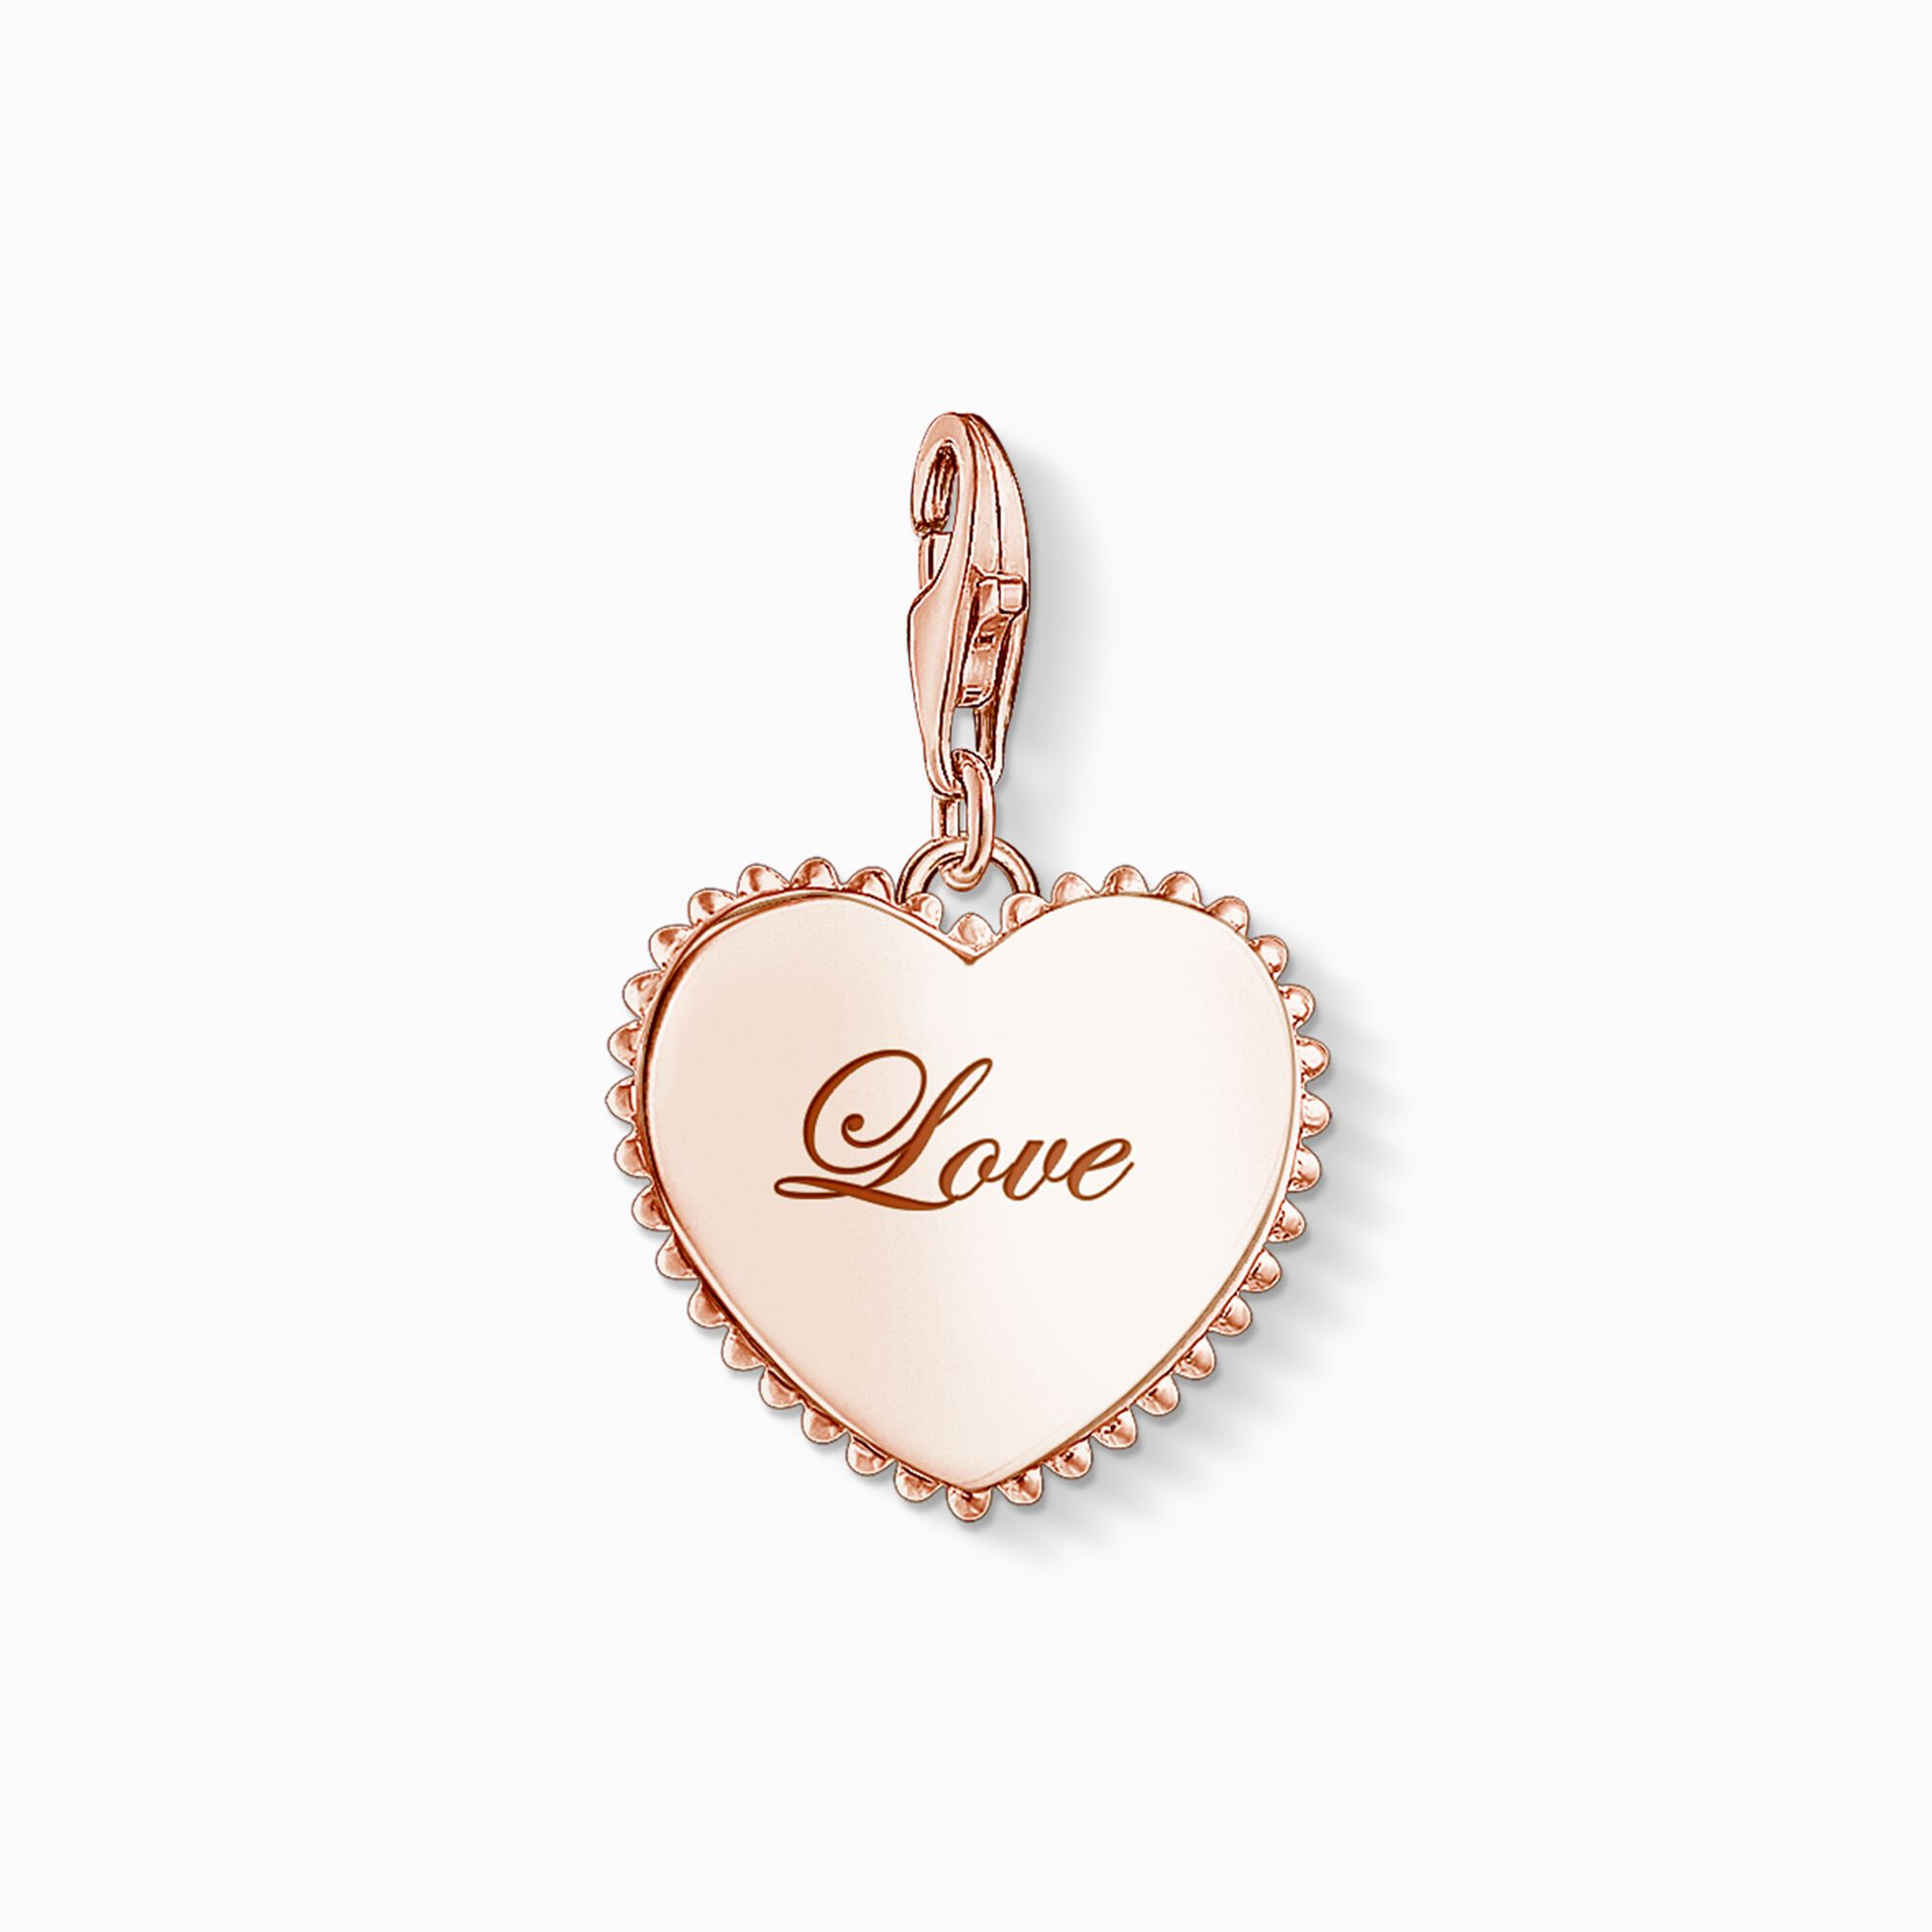 Charm pendant heart love from the Charm Club collection in the THOMAS SABO online store